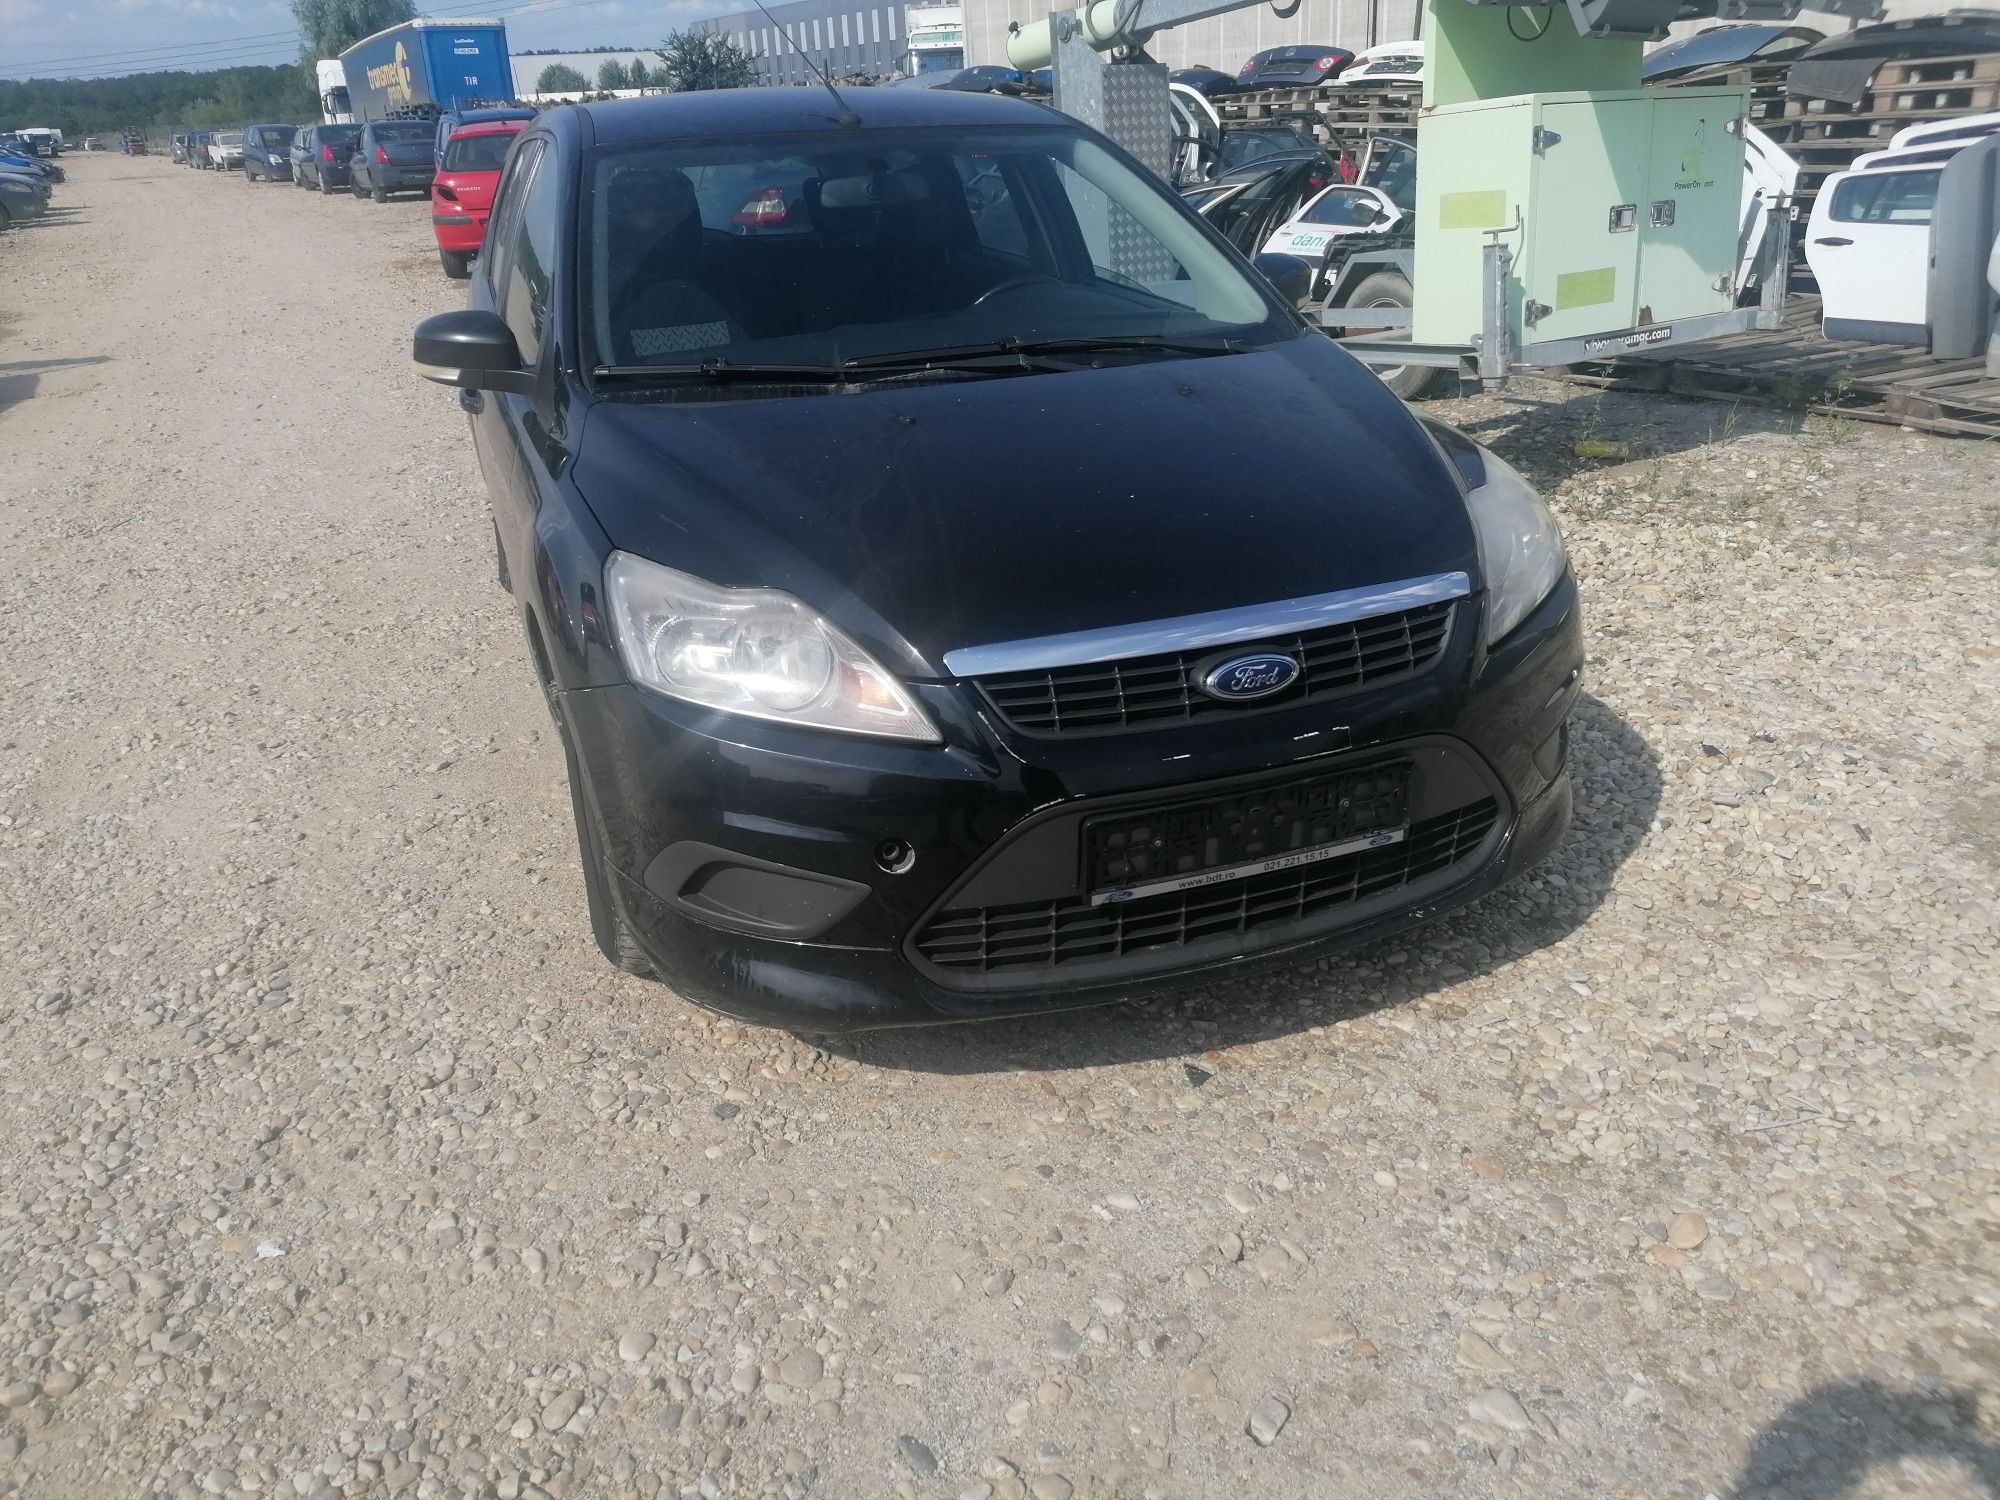 Usa Ford Focus, usa portiera Ford Focus 2 facelift